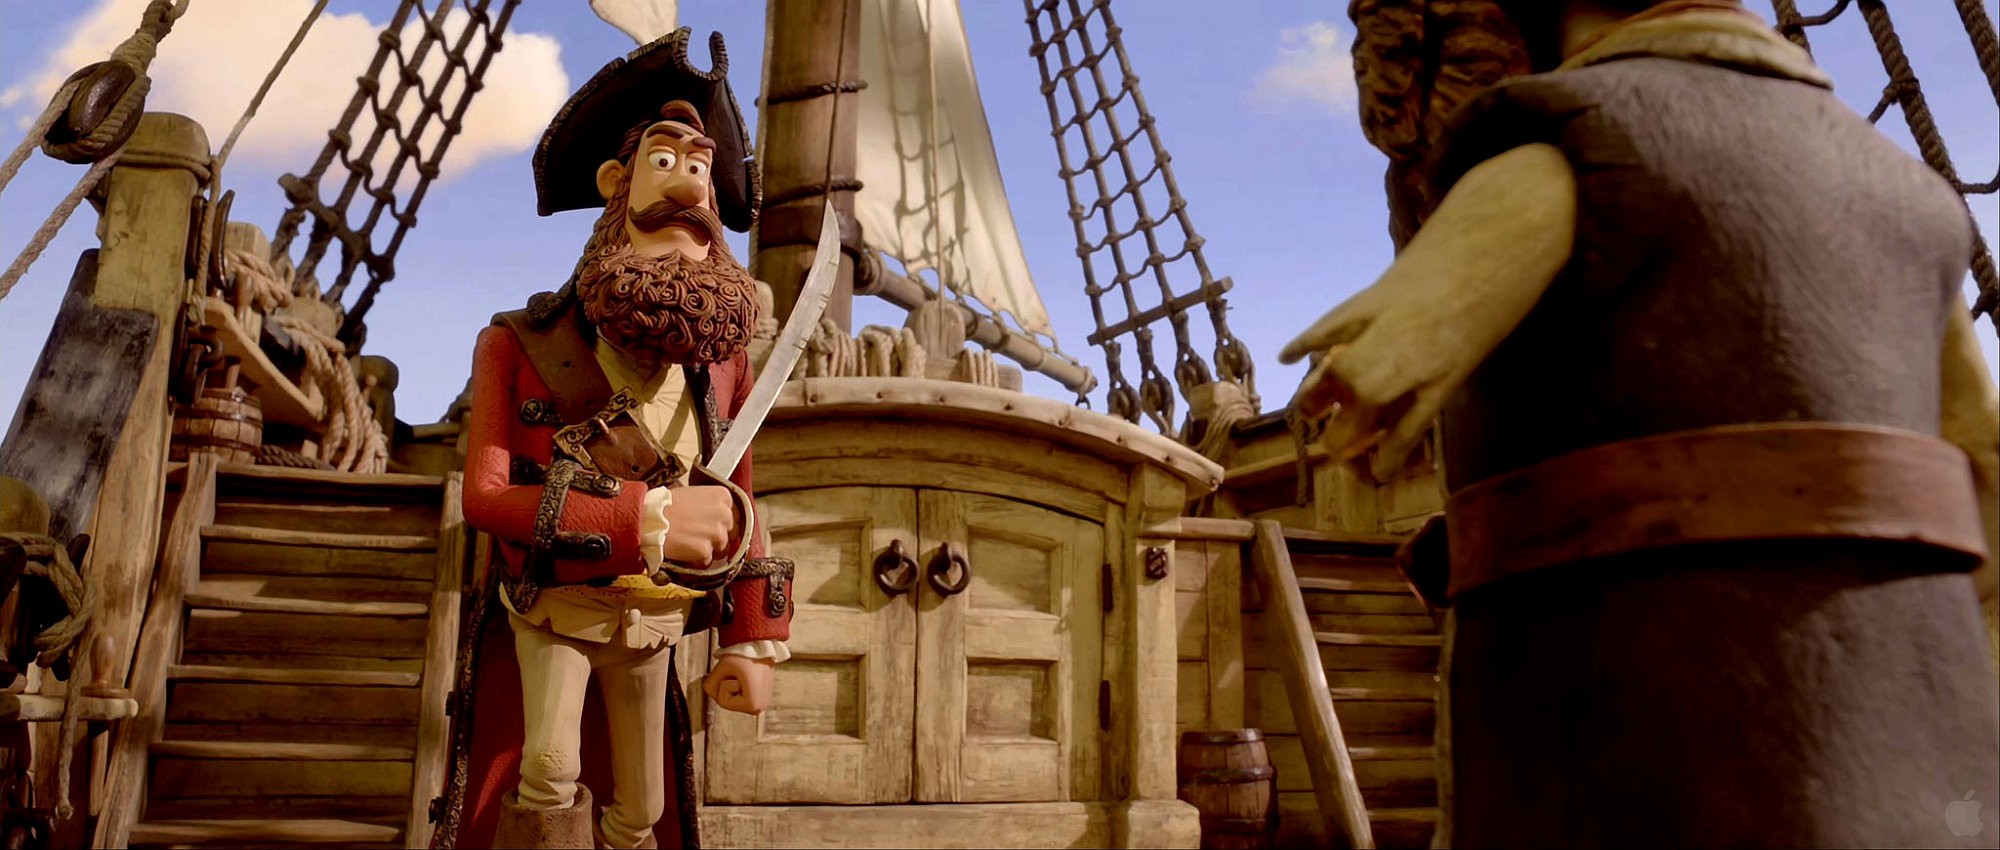 A scene from Columbia Pictures' The Pirates! Band of Misfits (2012)